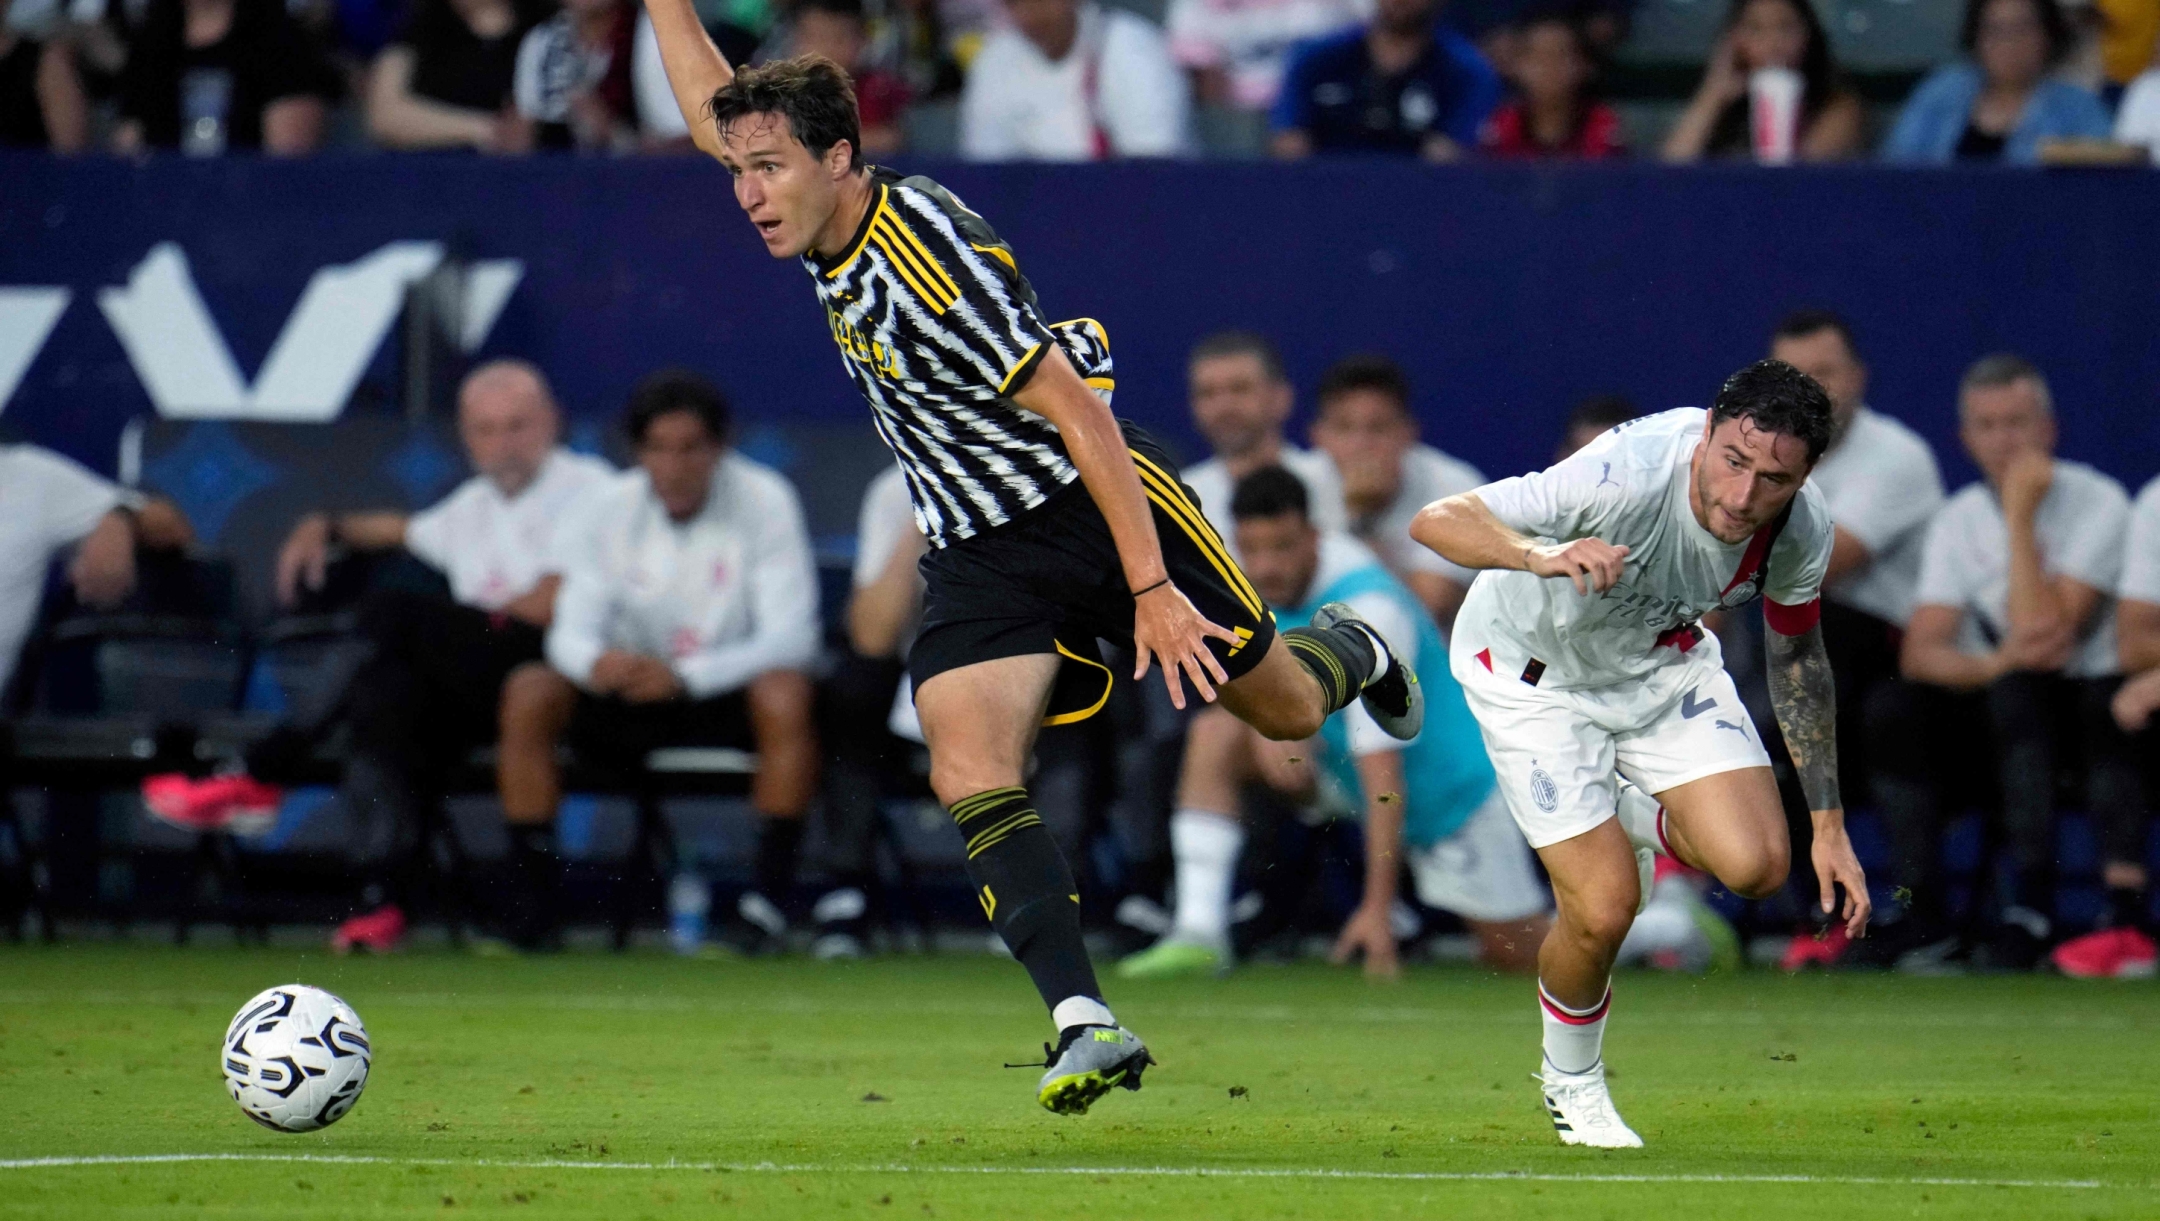 CARSON, CALIFORNIA - JULY 27: Federico Chiesa #7 of Juventus runs past a tackle by Davide Calabria #2 of Milan during the first half of the pre-season friendly match between Juventus and AC Milan at Dignity Health Sports Park on July 27, 2023 in Carson, California.   Kevork Djansezian/Getty Images/AFP (Photo by KEVORK DJANSEZIAN / GETTY IMAGES NORTH AMERICA / Getty Images via AFP)